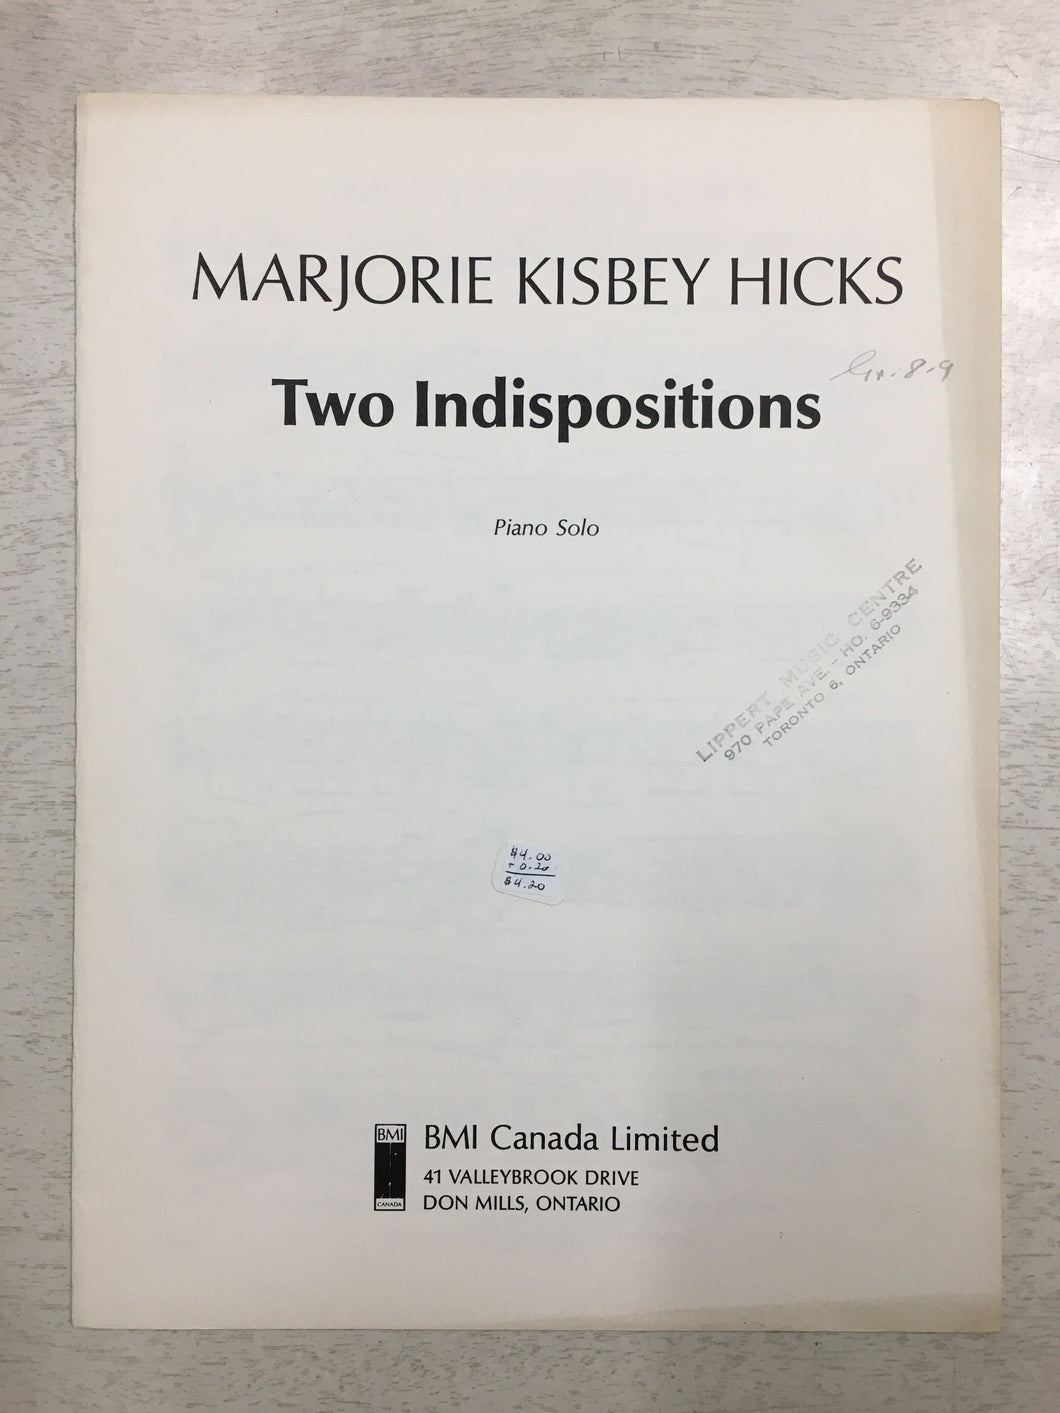 Two Indispositions, Marjorie Kisbey Hicks